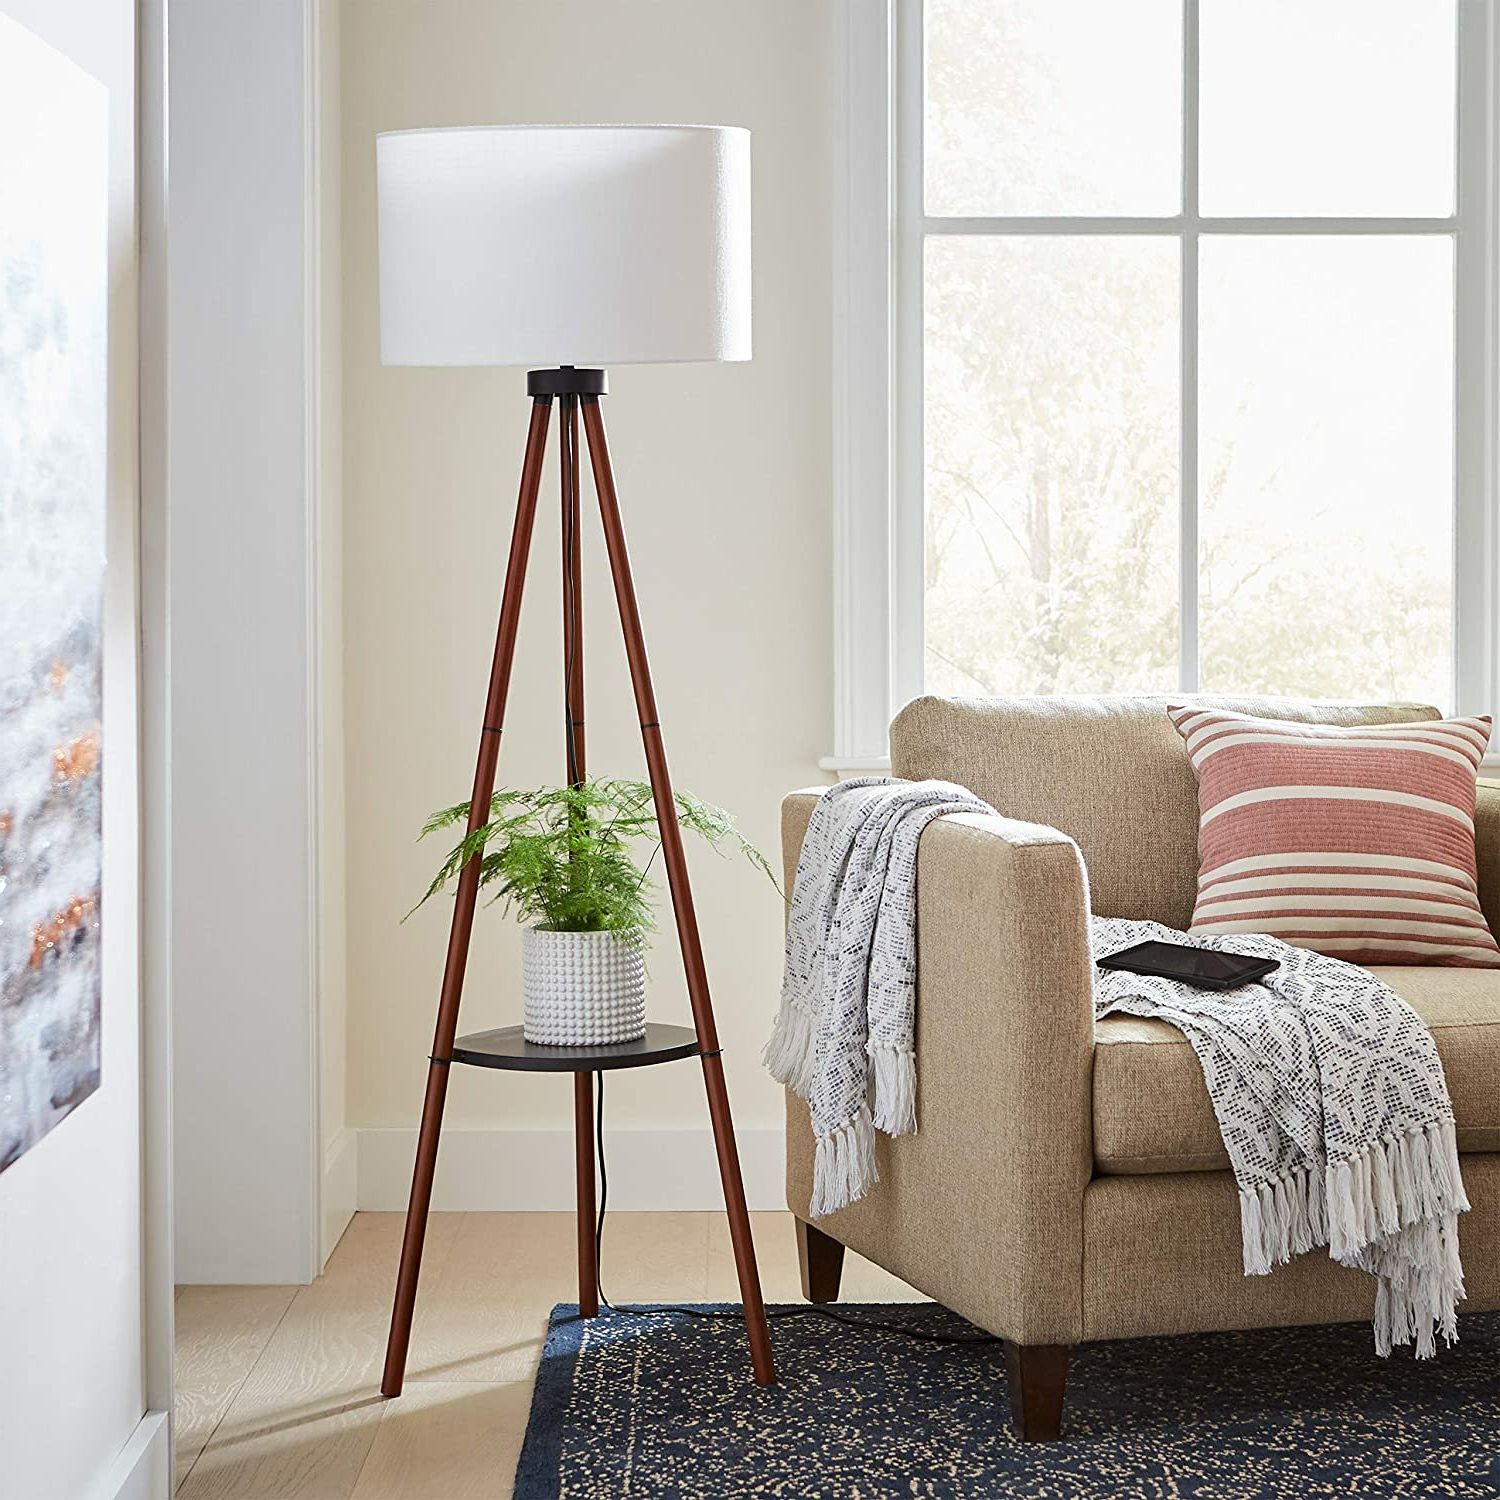 Newest George Oliver Stone & Beam Contemporary Unique Tripod Floor Lamp With  Storage Tray In The Middle Of The Base (View 4 of 15)